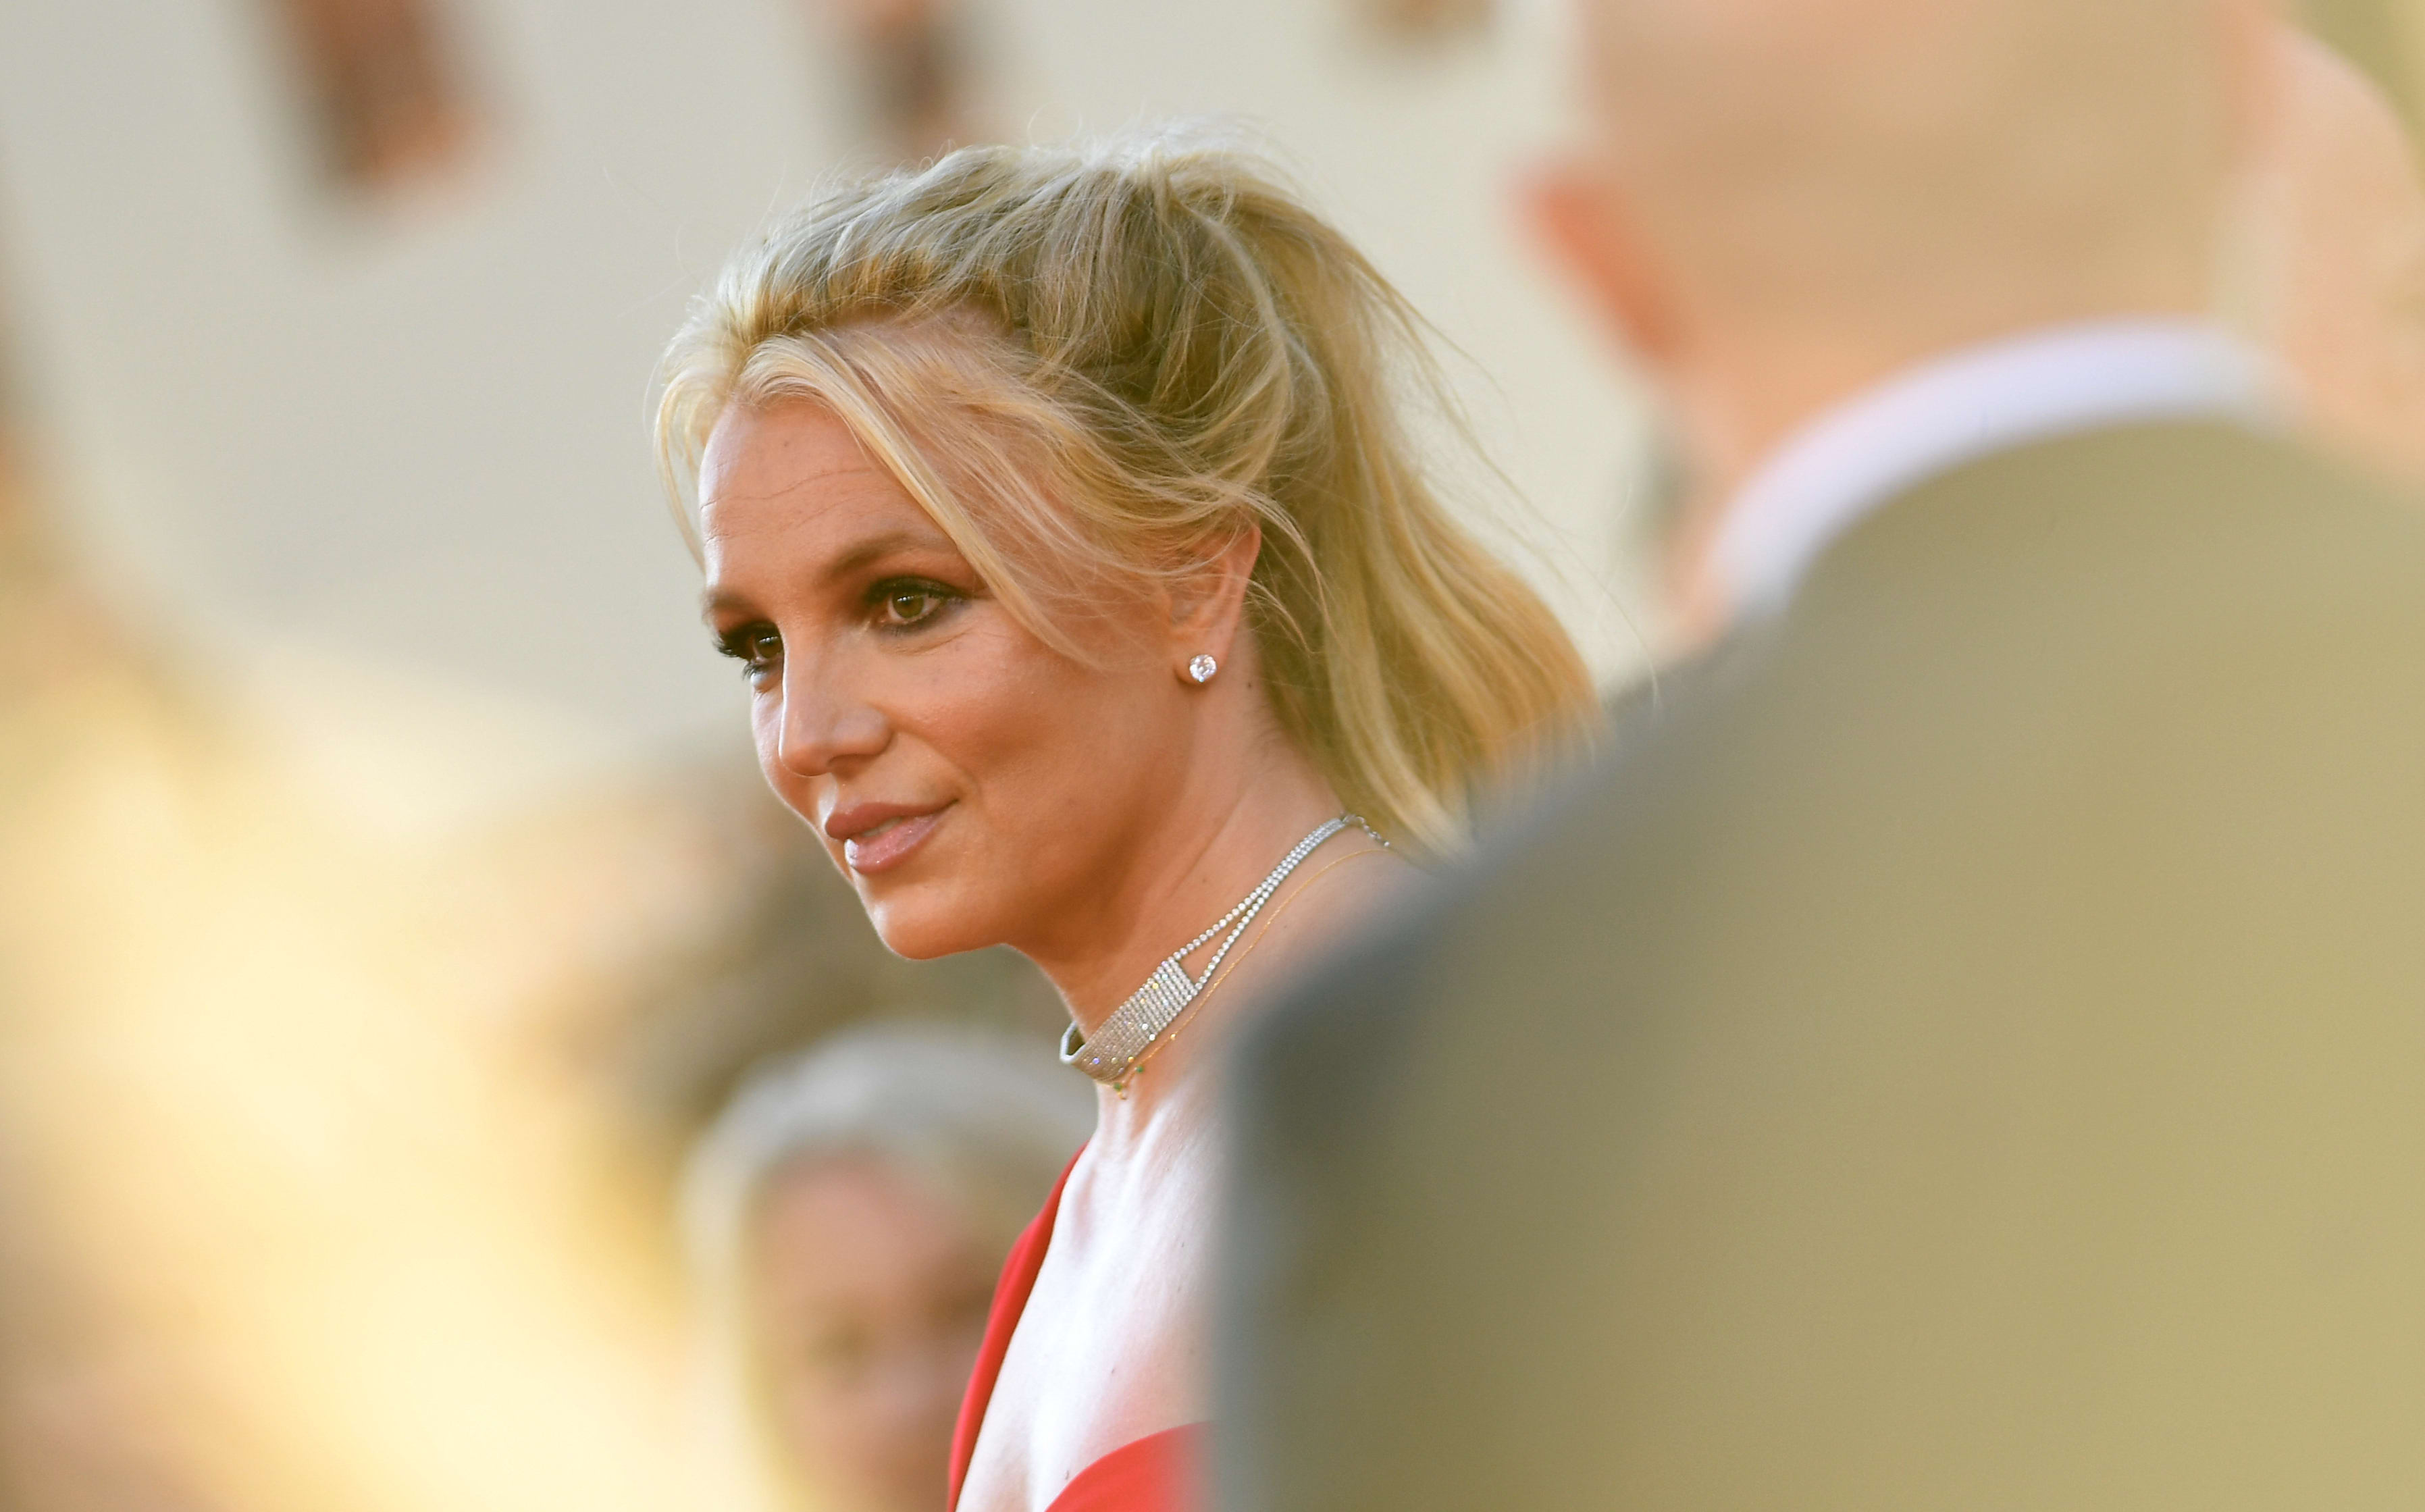 Britney Spears arrives at a film premiere in 2019.